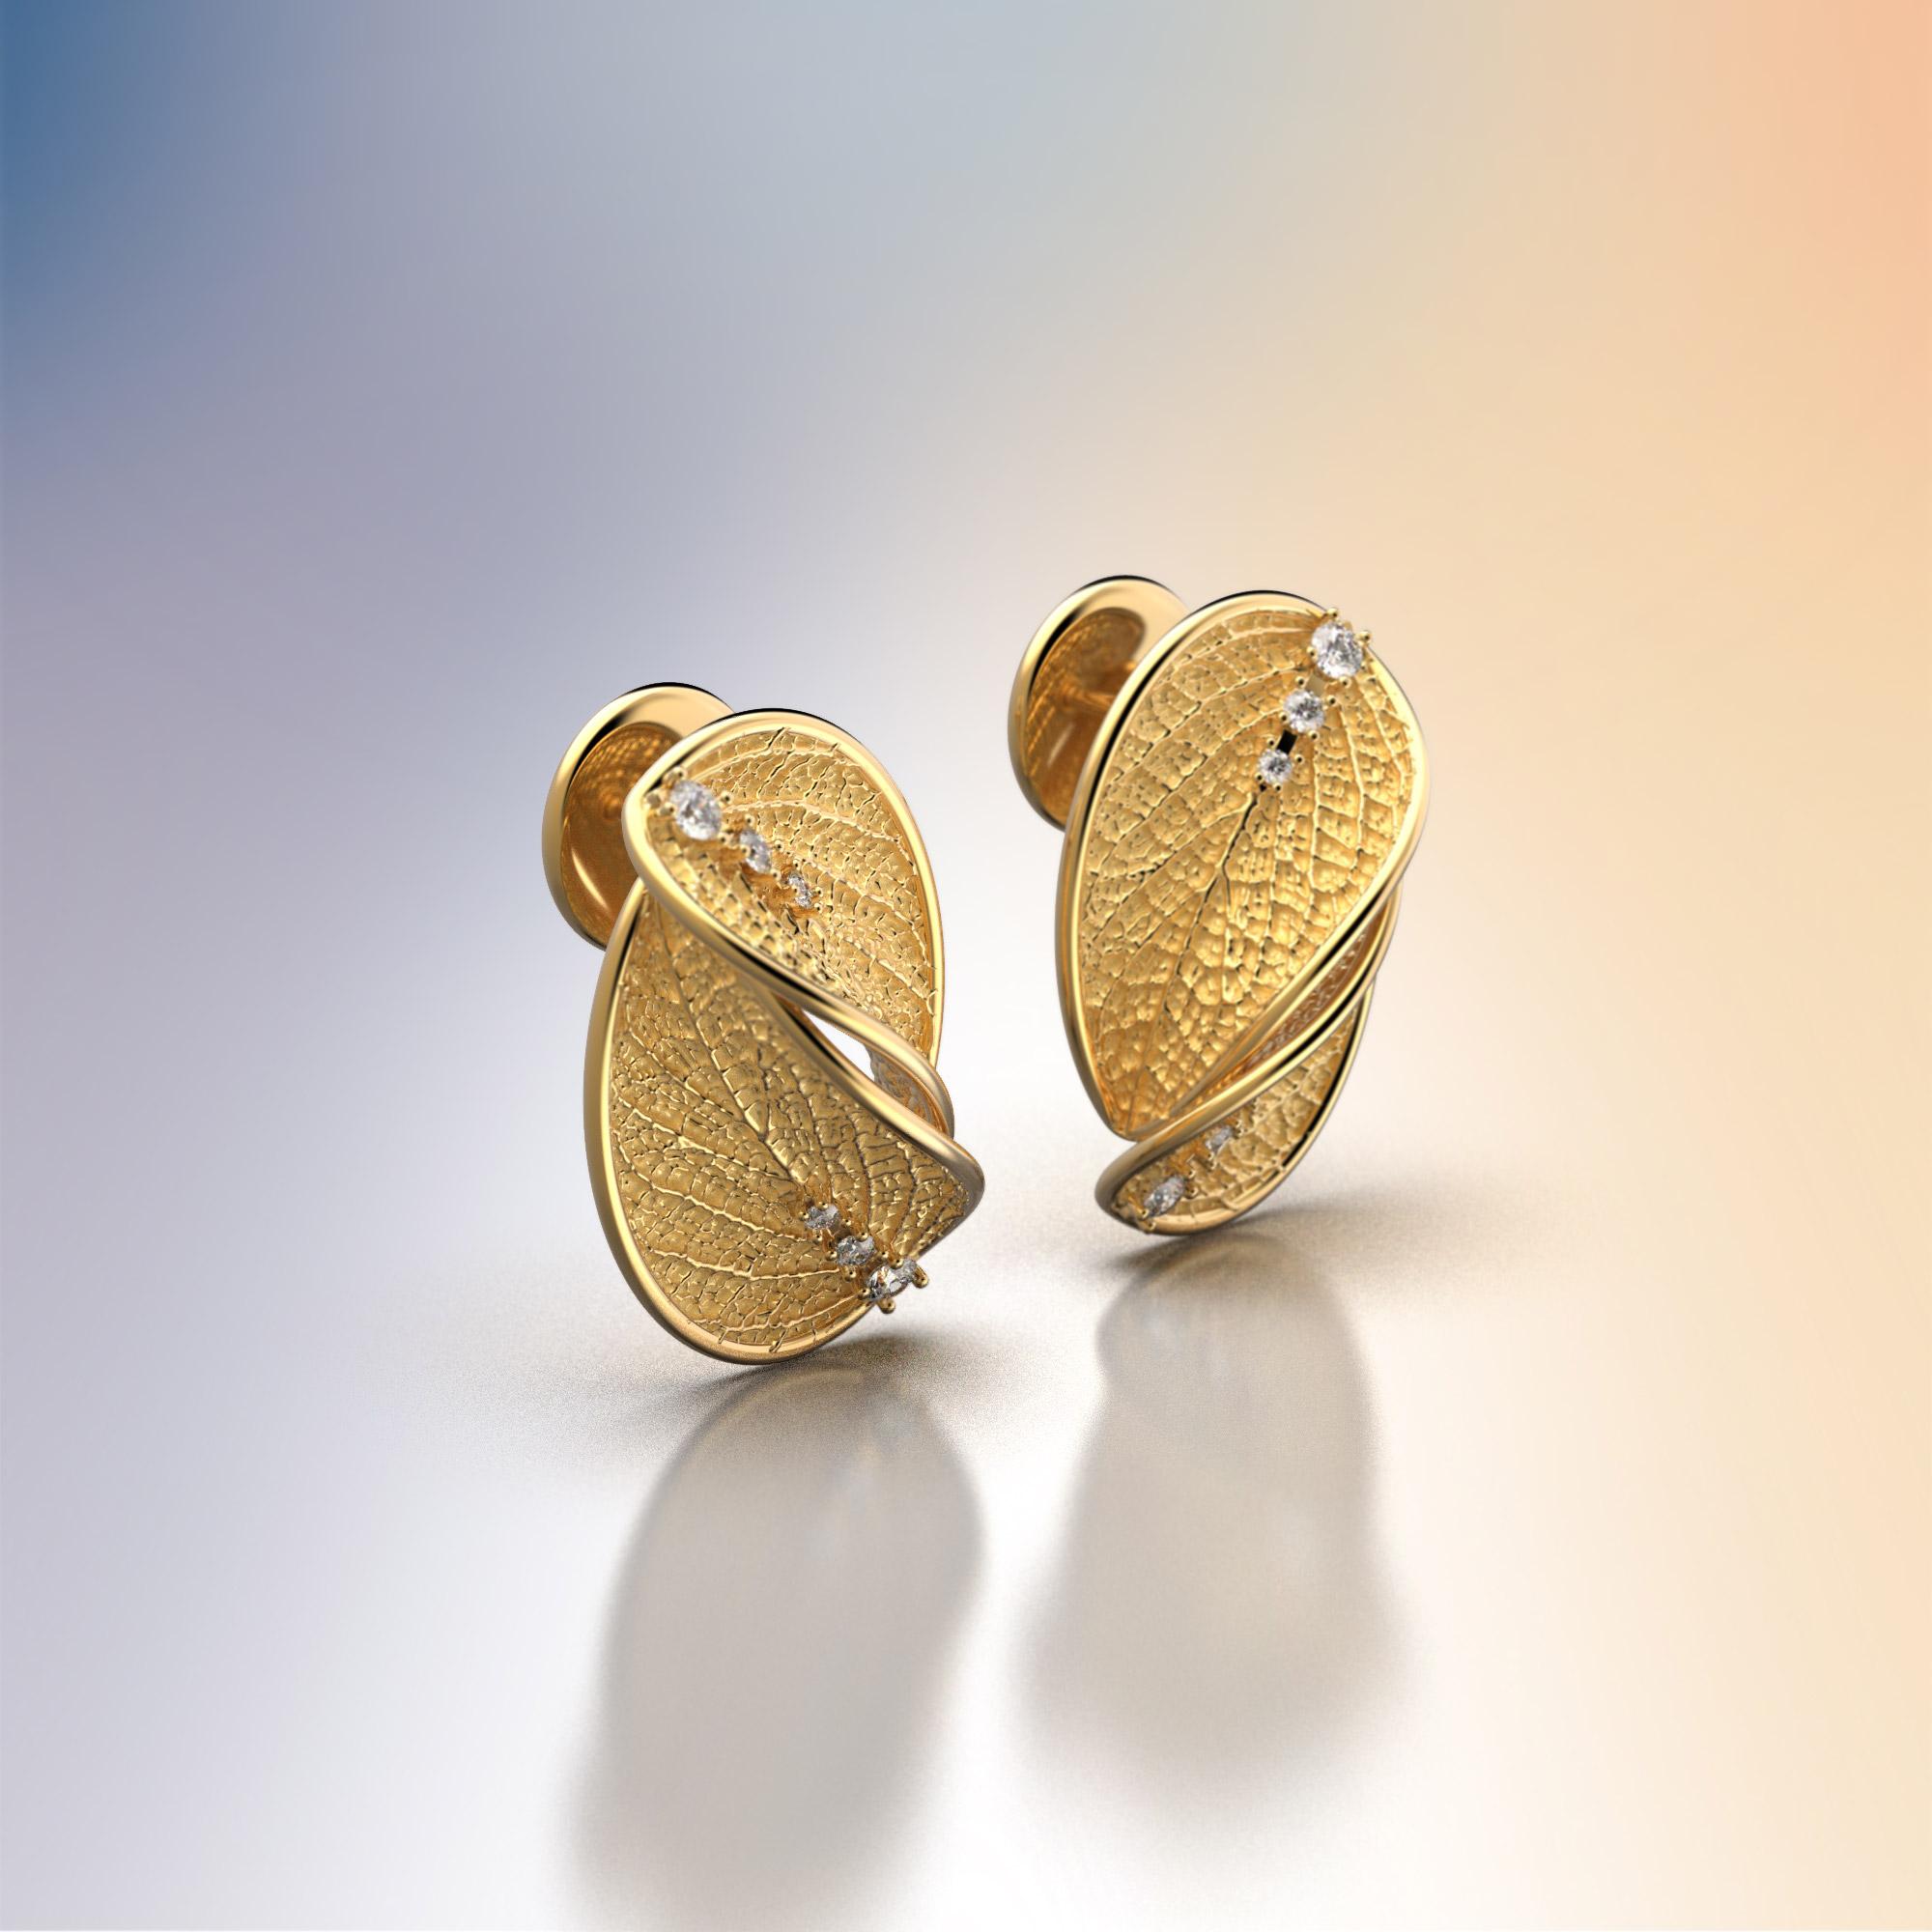 Made to order Diamond stud earrings in 14k Gold with leaf design. Flora collection.
The earrings of the Flora collection have the shape of the ash leaf, a sacred tree in many cultures, a symbol of the sun and always used as a protection.
The